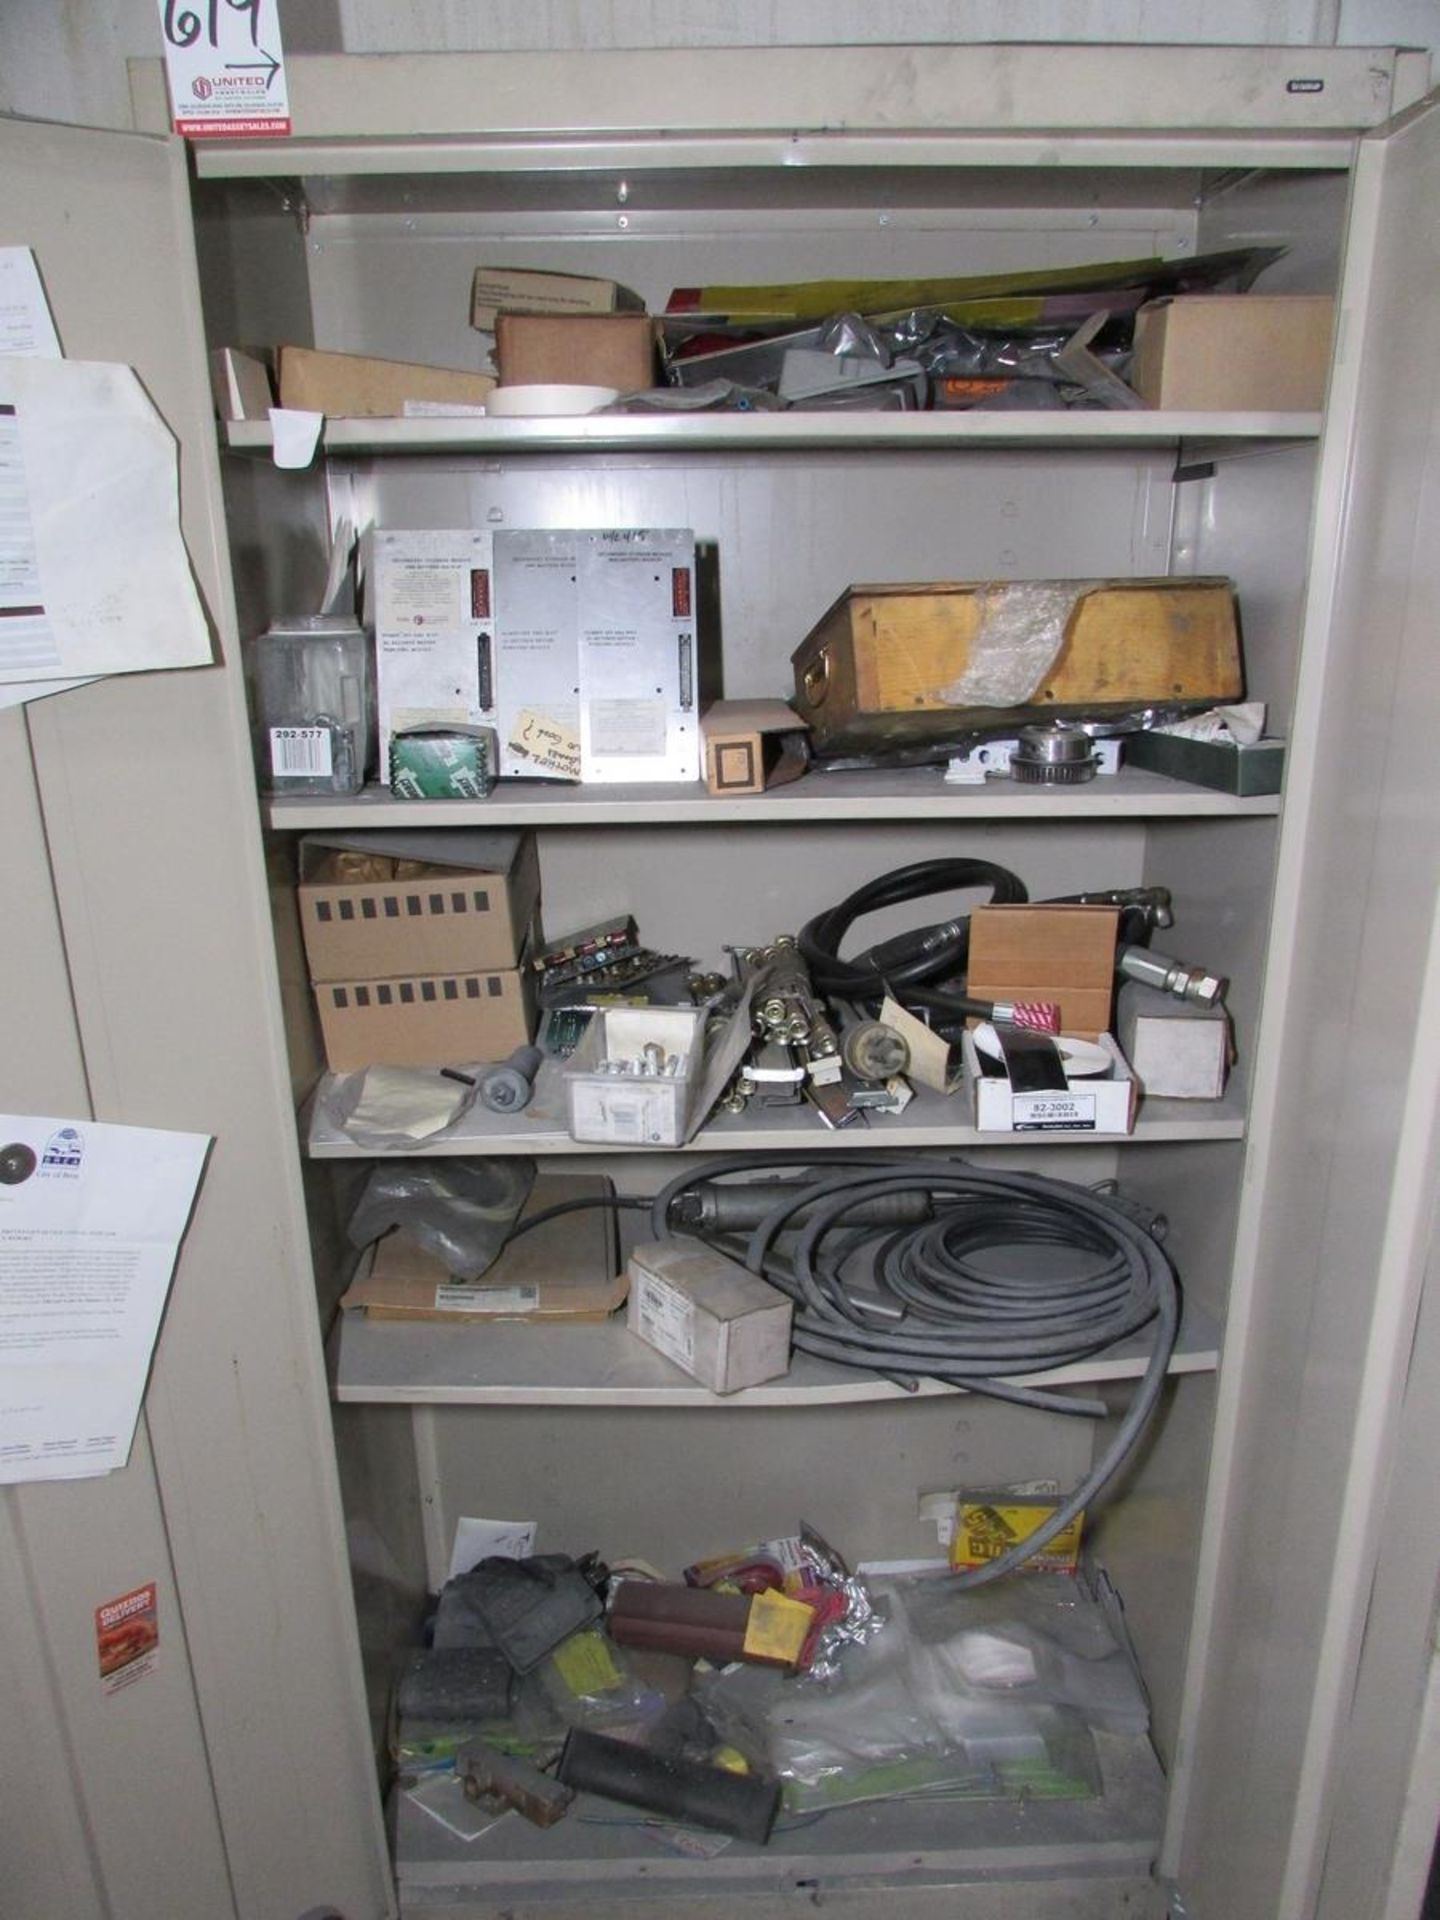 LOT - (3) 2-DOOR CABINETS, W/ CONTENTS: ASSORTED PARTS, FUSES, HARDWARE, ETC. - Image 2 of 10